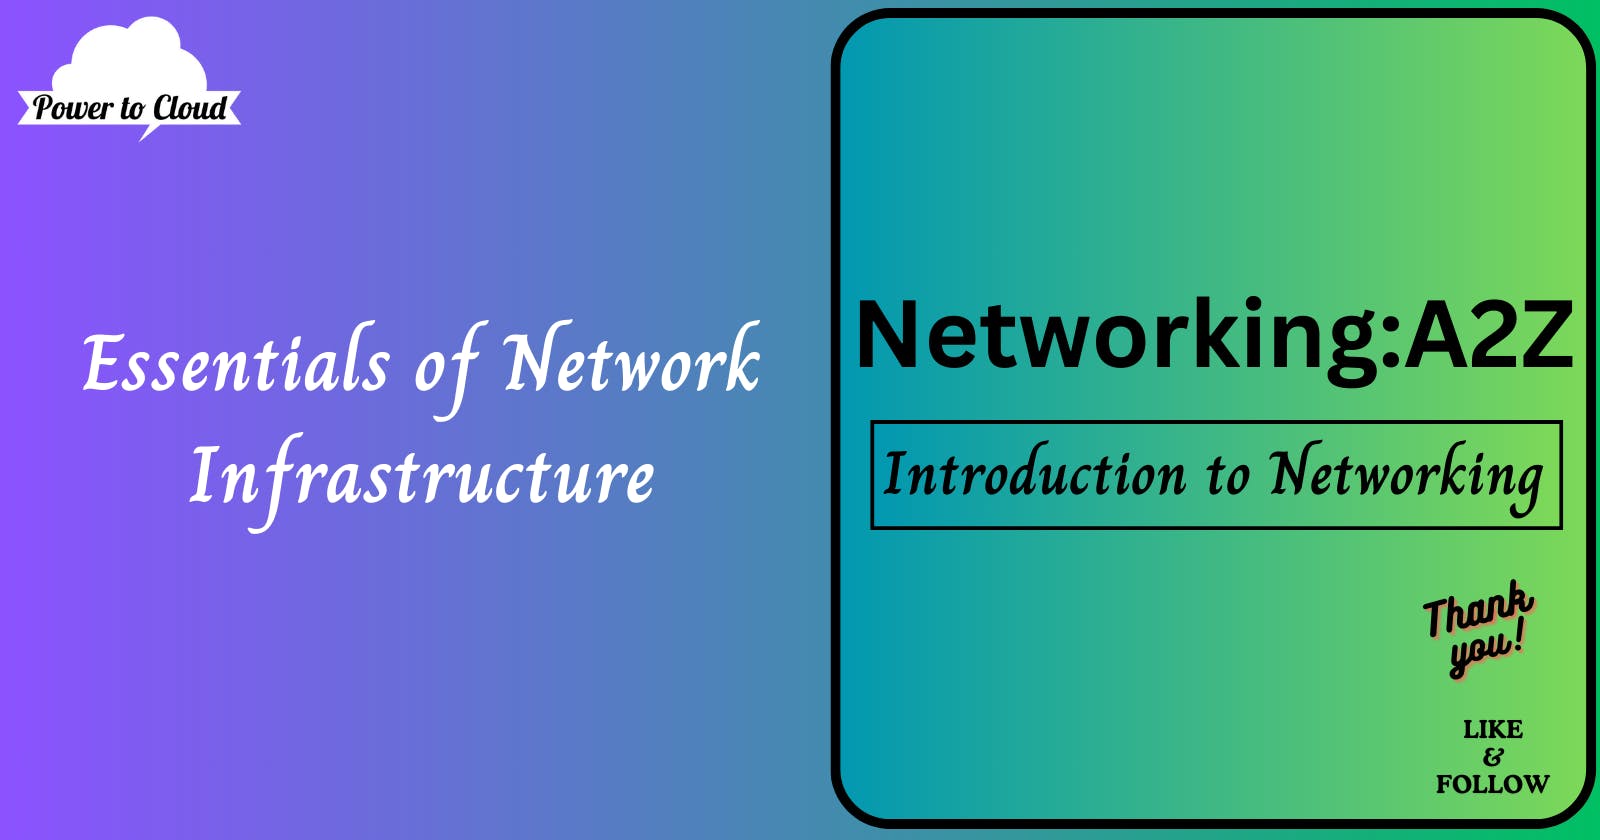 1.5 Essentials of Network Infrastructure: Network Ports and Patch Panels